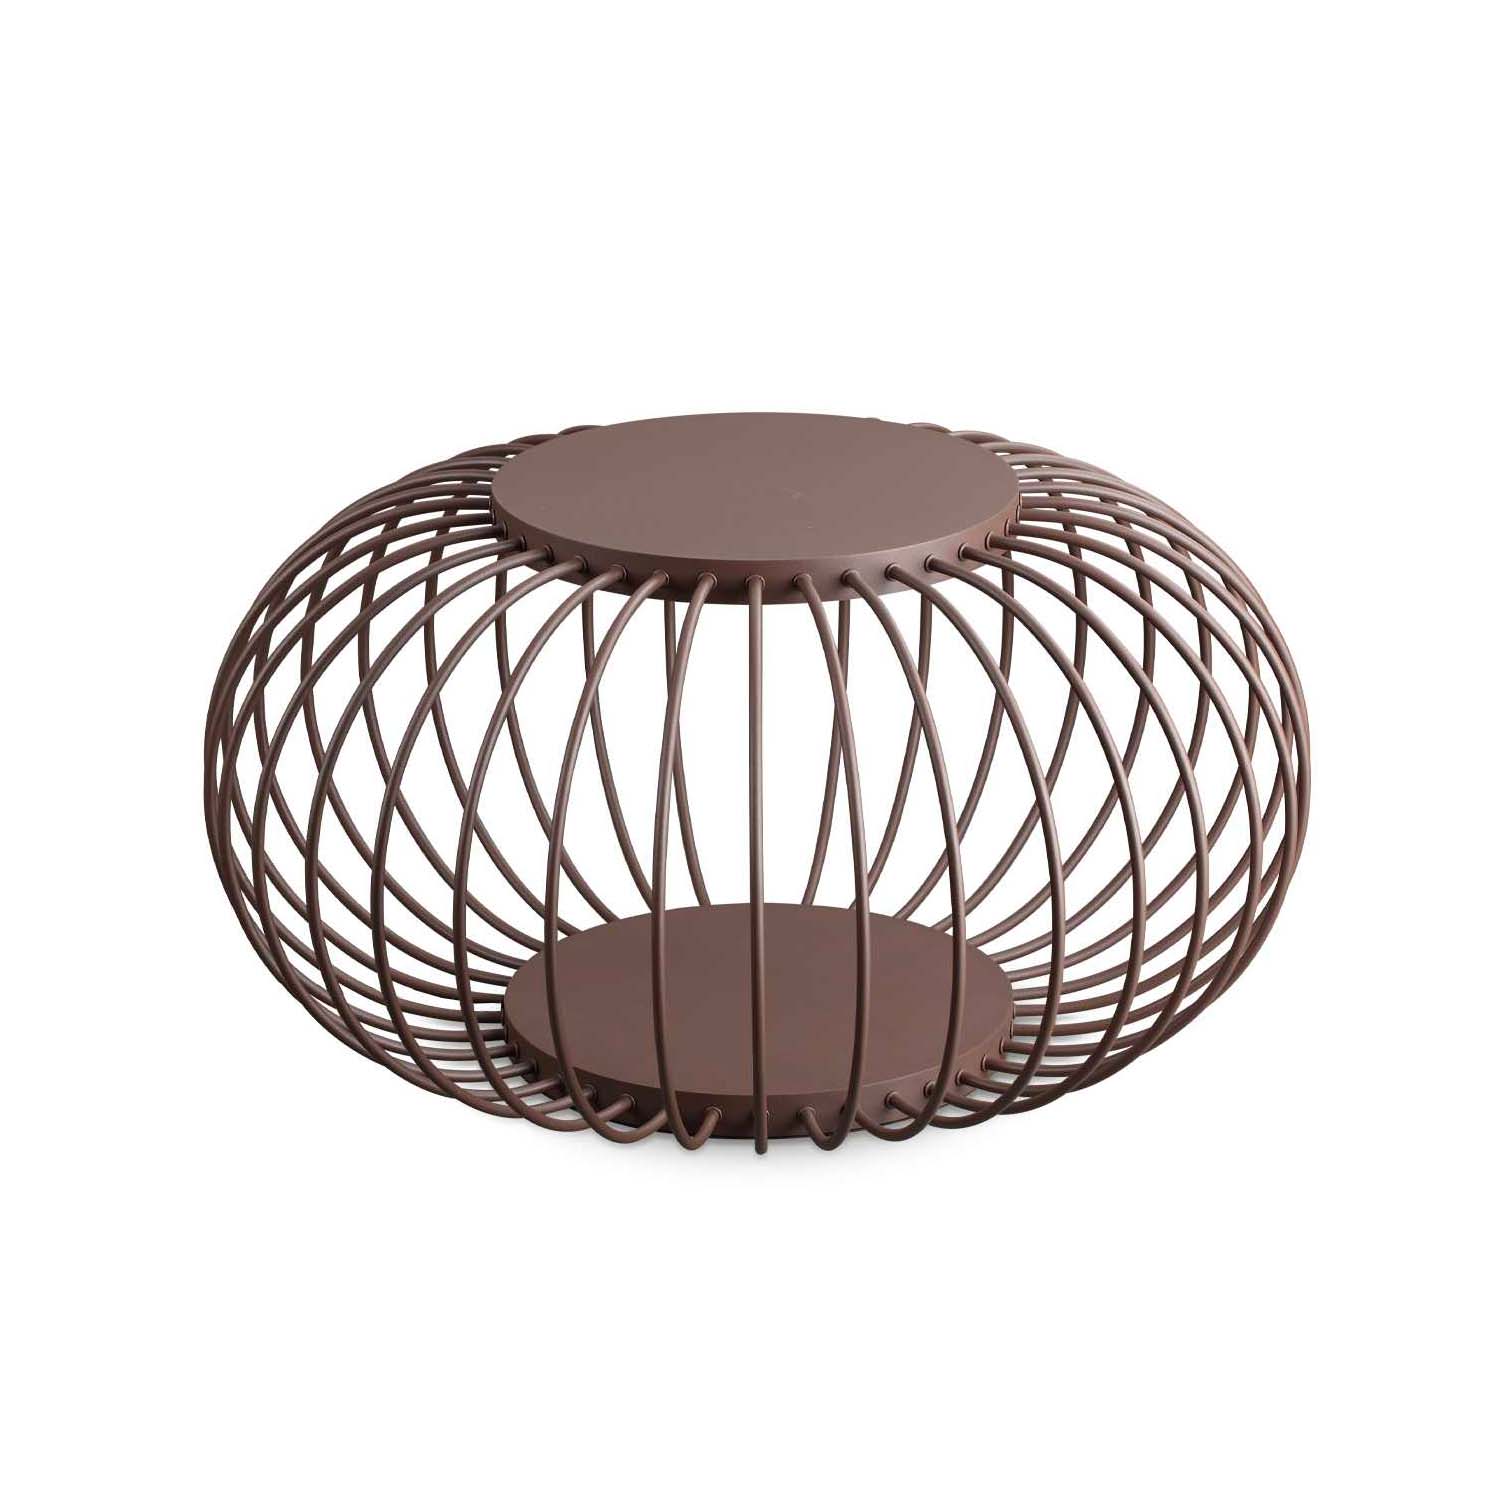 DJAMBE - Outdoor lamp in the shape of a designer cage